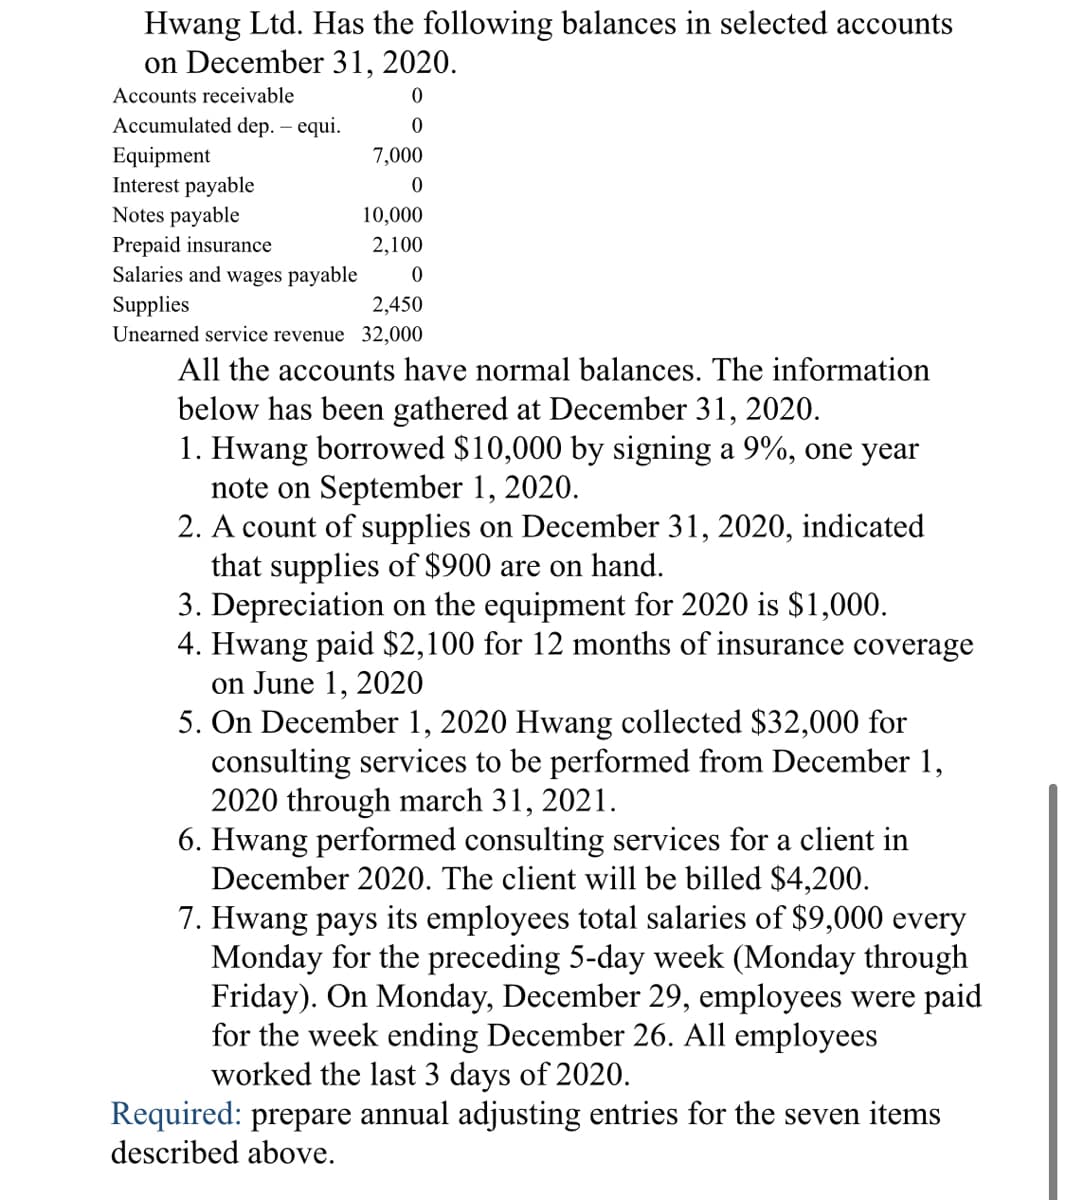 Hwang Ltd. Has the following balances in selected accounts
on December 31, 2020.
Accounts receivable
Accumulated dep. – equi.
Equipment
Interest payable
Notes payable
Prepaid insurance
Salaries and wages payable
Supplies
Unearned service revenue 32,000
7,000
10,000
2,100
2,450
All the accounts have normal balances. The information
below has been gathered at December 31, 2020.
1. Hwang borrowed $10,000 by signing a 9%, one year
note on September 1, 2020.
2. A count of supplies on December 31, 2020, indicated
that supplies of $900 are on hand.
3. Depreciation on the equipment for 2020 is $1,000.
4. Hwang paid $2,100 for 12 months of insurance coverage
on June 1, 2020
5. On December 1, 2020 Hwang collected $32,000 for
consulting services to be performed from December 1,
2020 through march 31, 2021.
6. Hwang performed consulting services for a client in
December 2020. The client will be billed $4,200.
7. Hwang pays its employees total salaries of $9,000 every
Monday for the preceding 5-day week (Monday through
Friday). On Monday, December 29, employees were paid
for the week ending December 26. All employees
worked the last 3 days of 2020.
Required: prepare annual adjusting entries for the seven items
described above.
